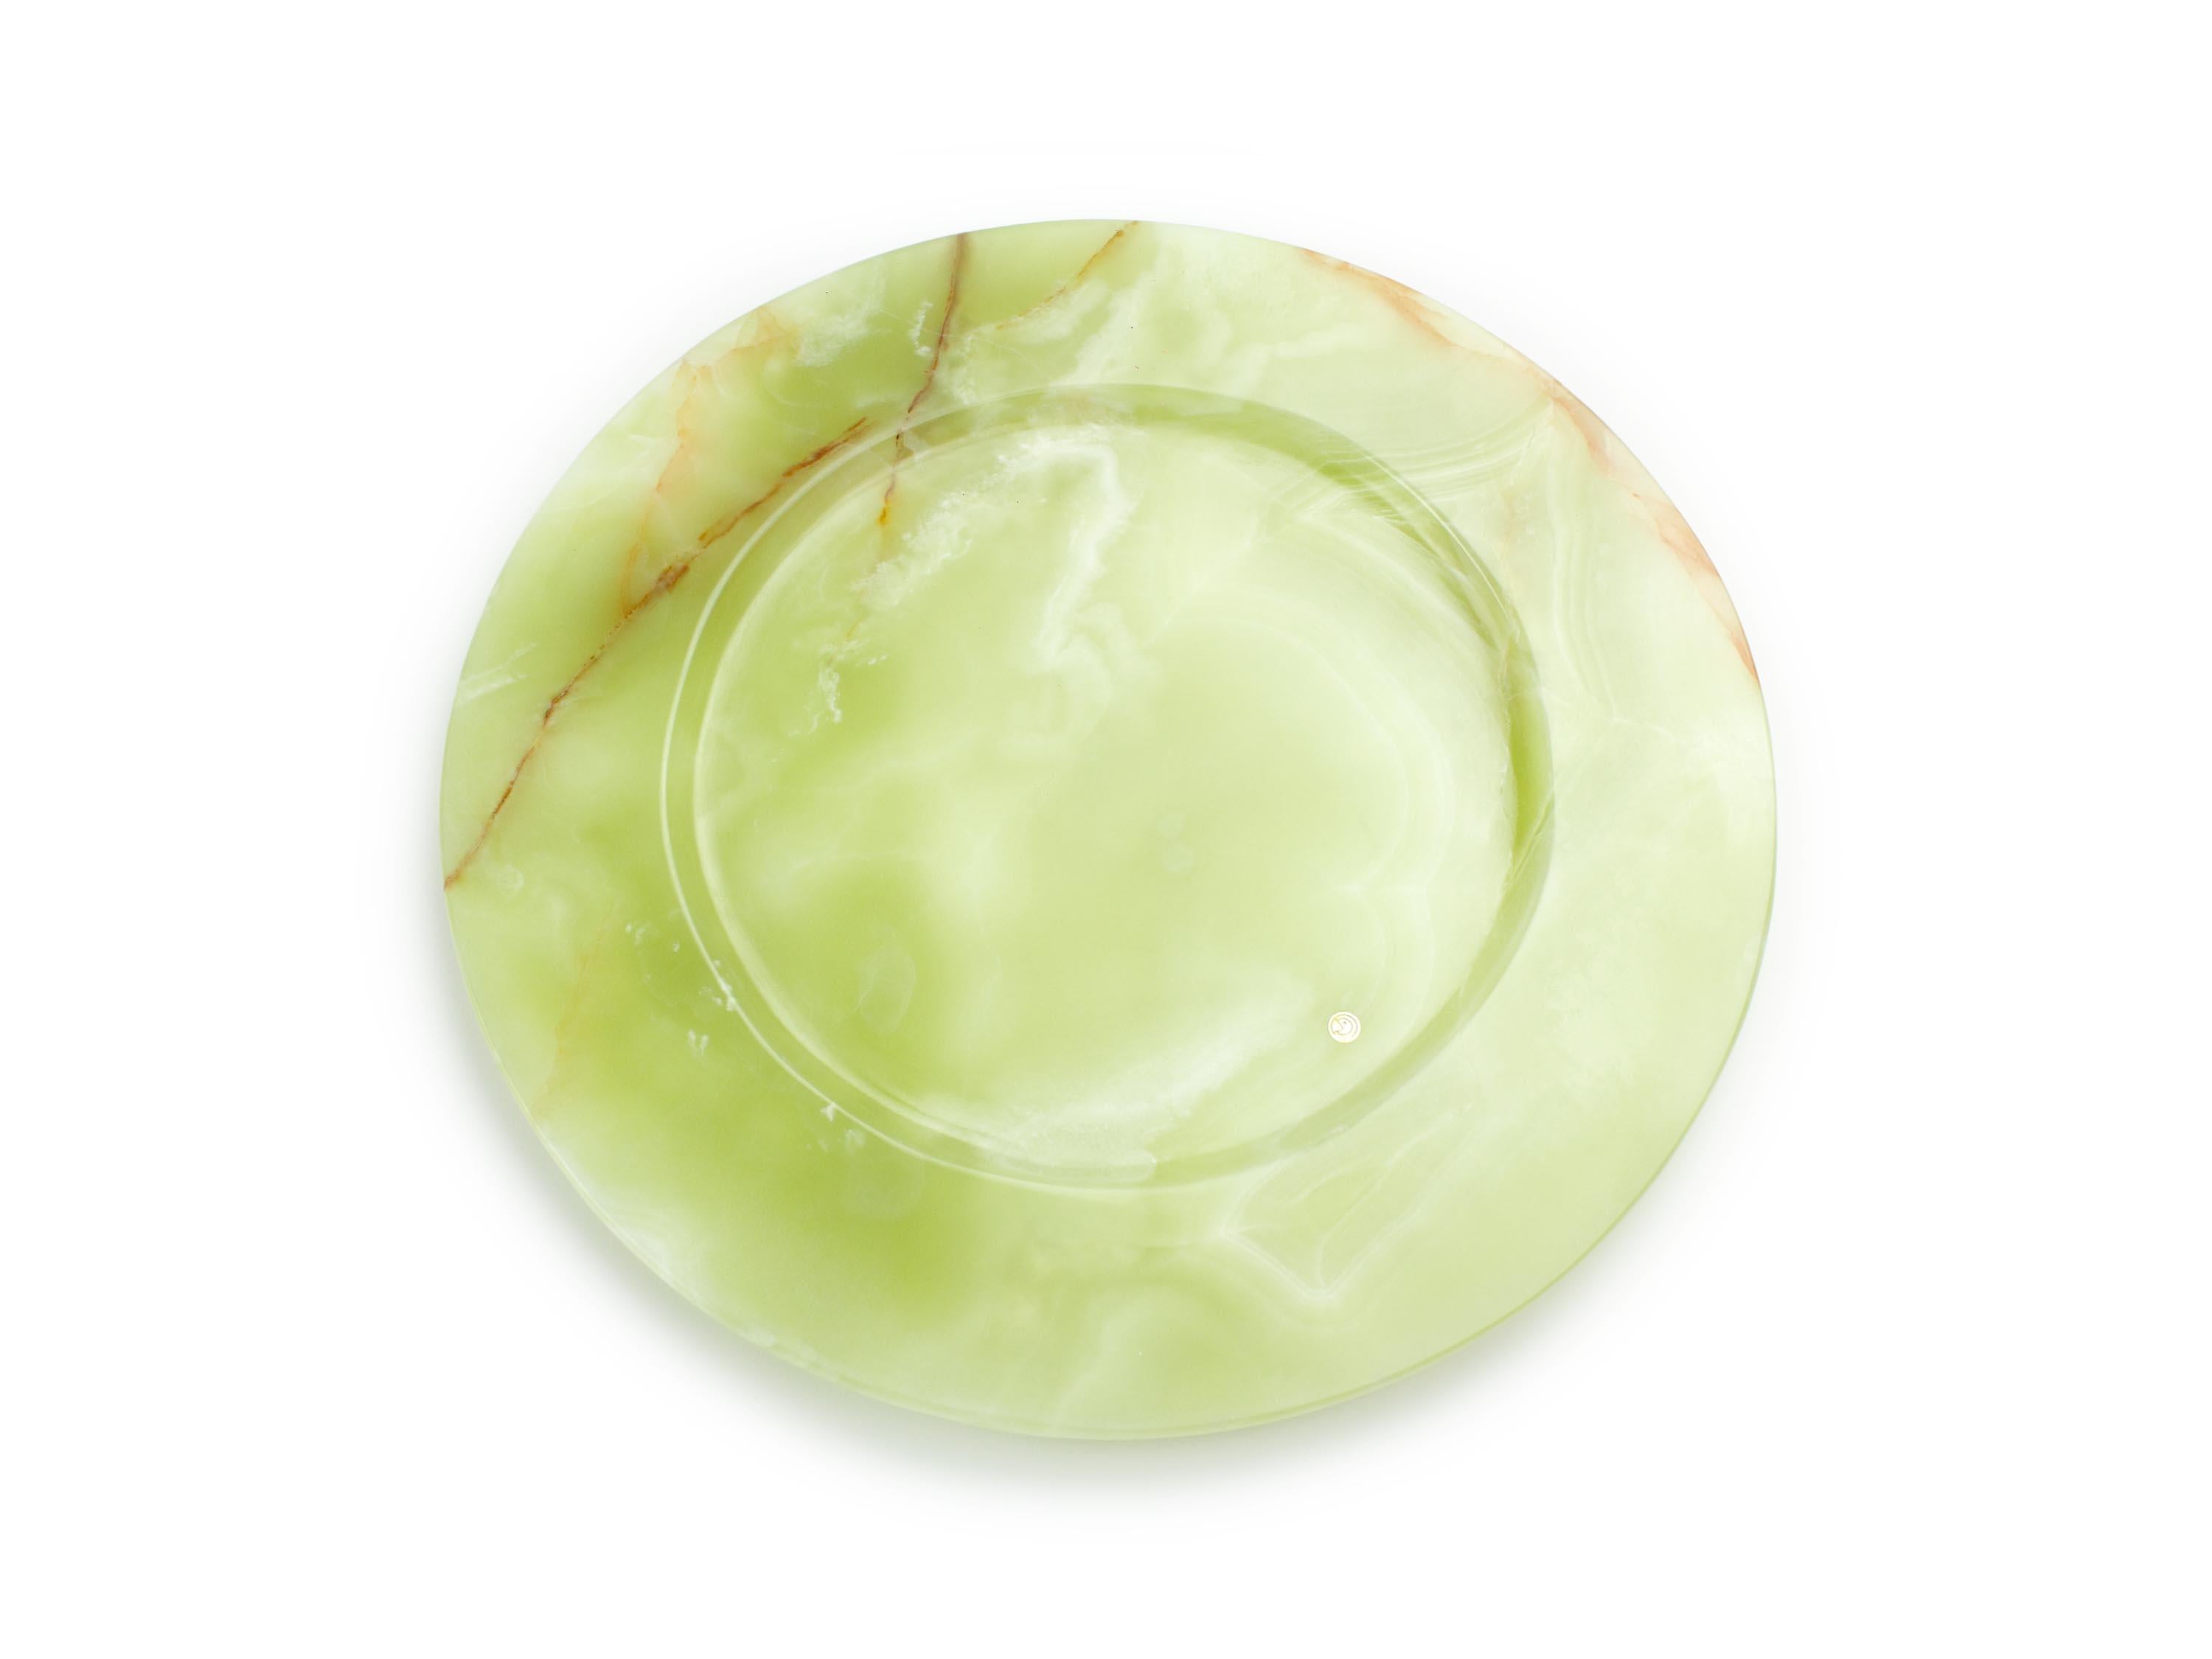  Charger Plate Platters Serveware Green Onyx Marble Handmade Collectible Design For Sale 1